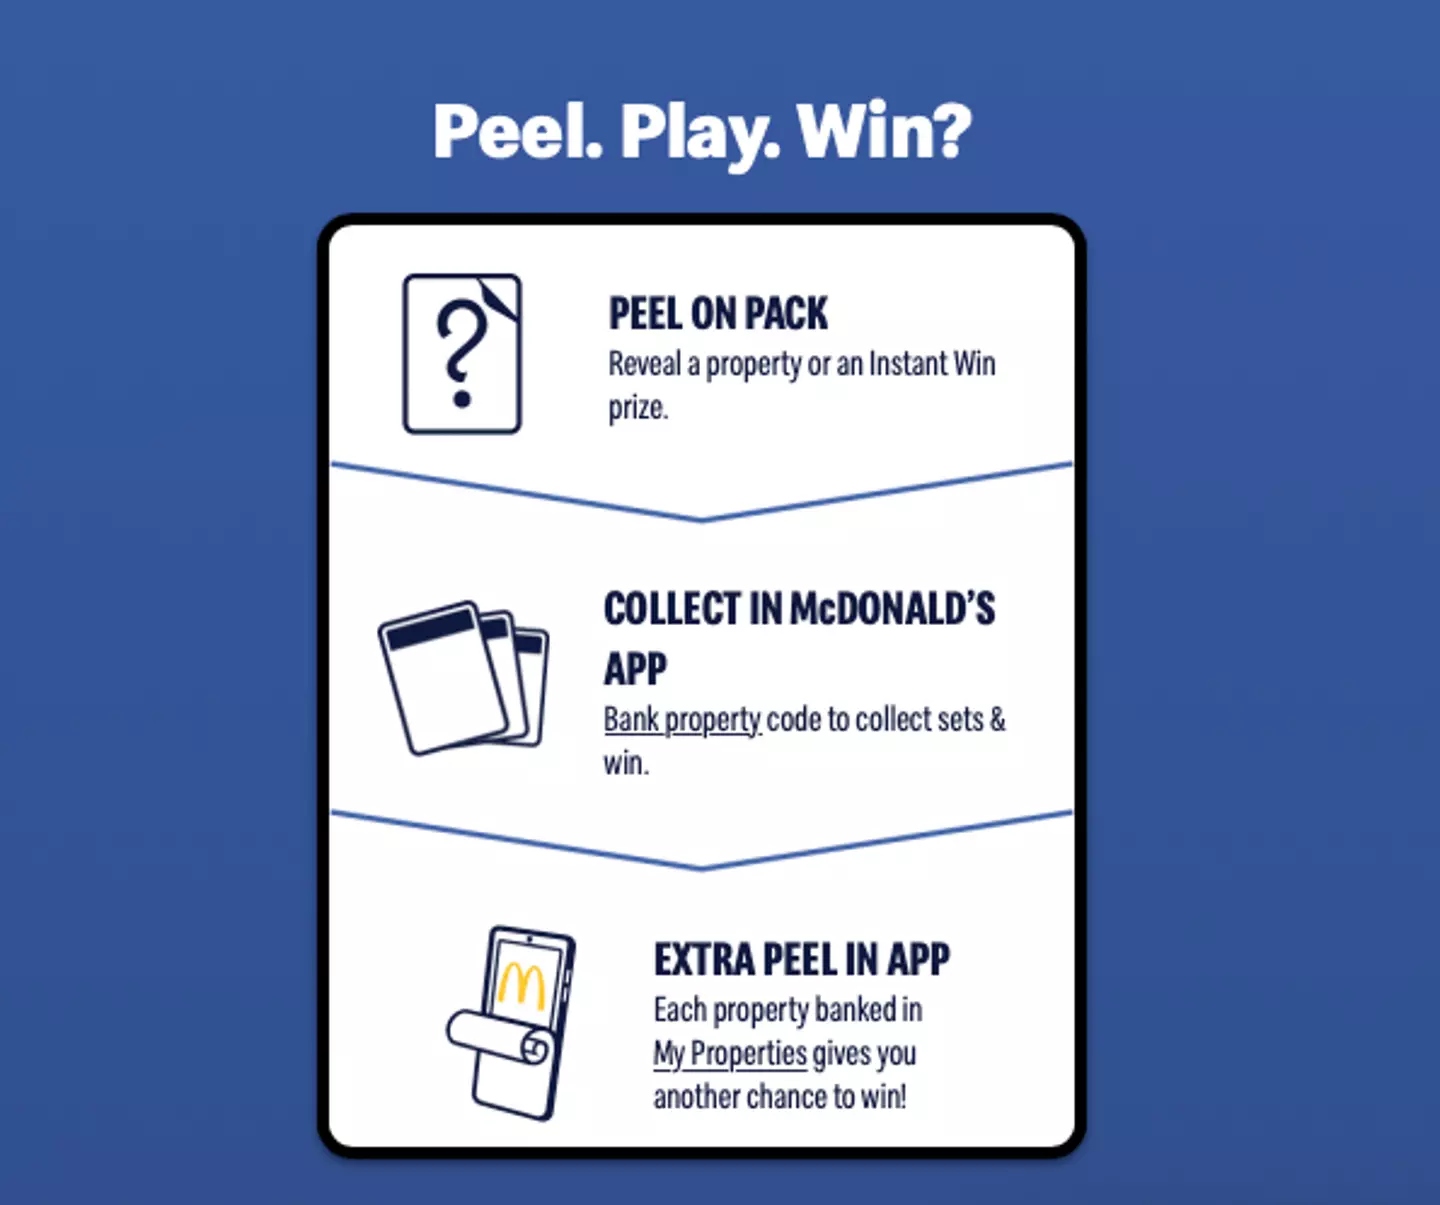 'Bank or swap peel' could offer more chances to win a prize.